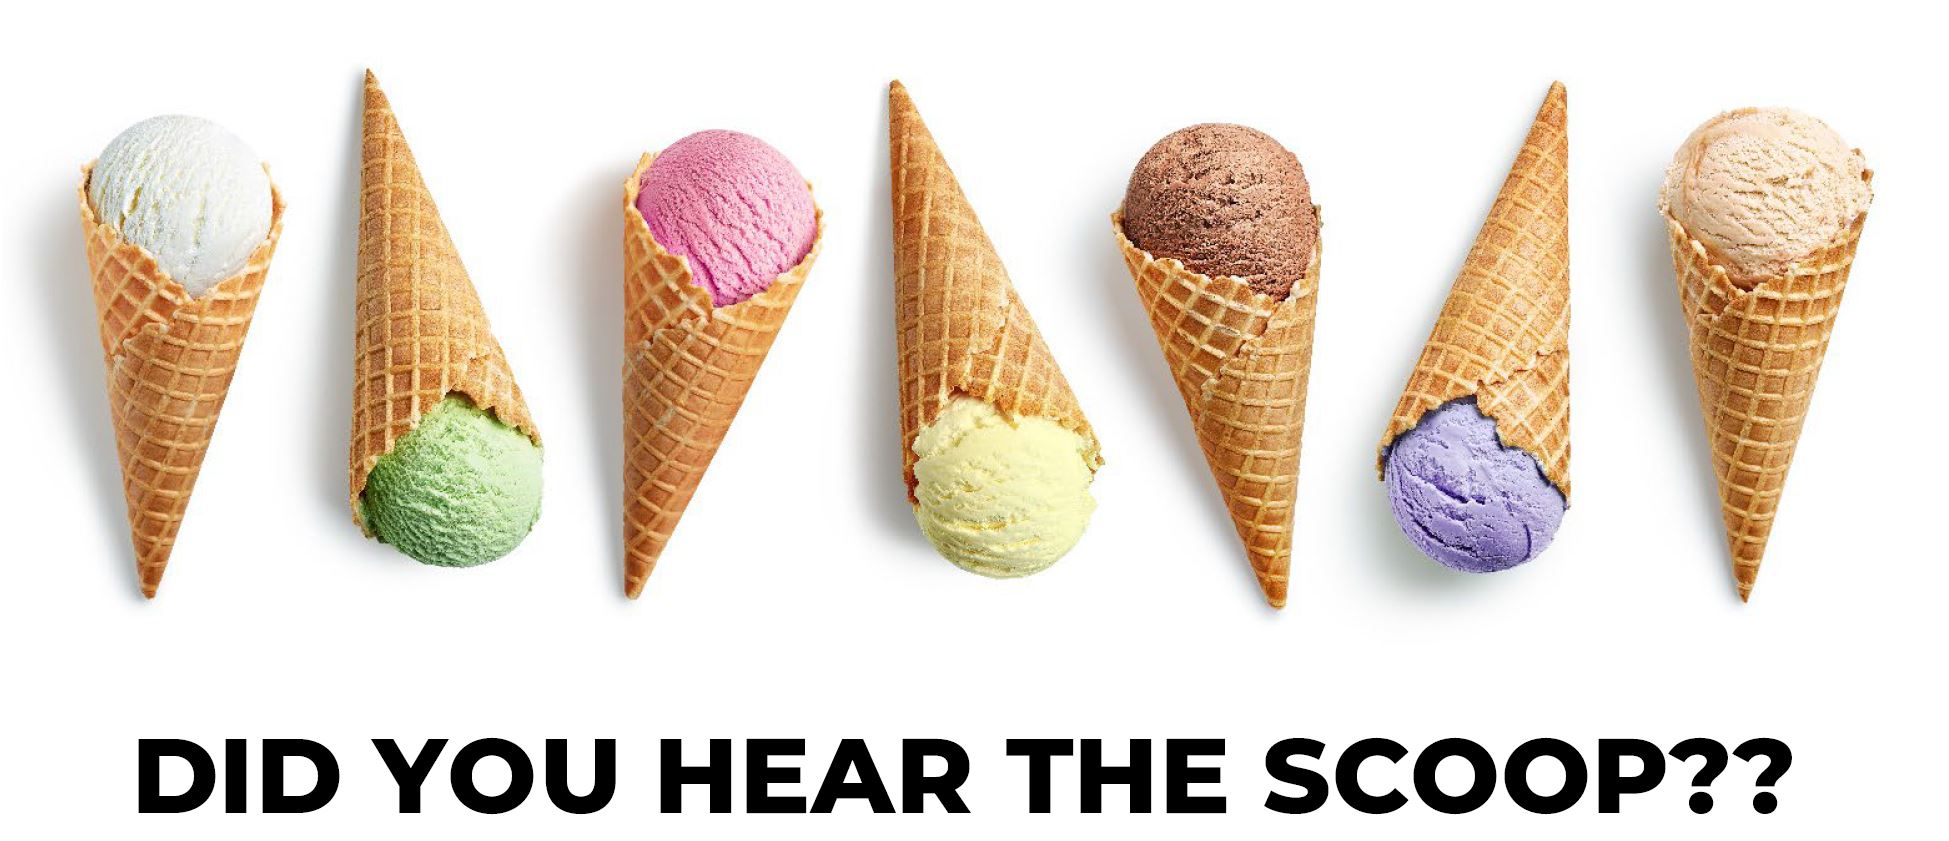 DID YOU HEAR THE SCOOP?